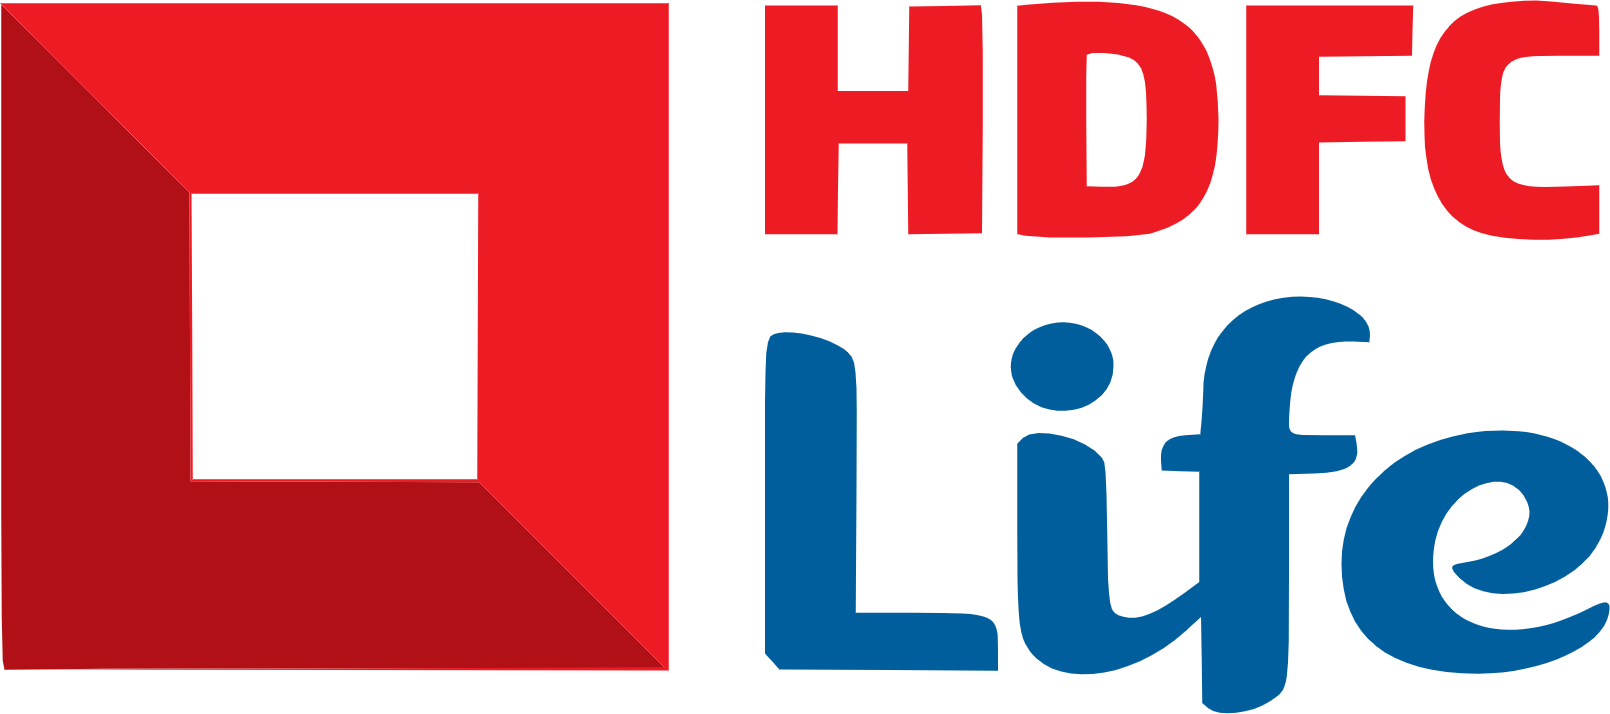 HDFC Life Insurance Company Stocks Live Updates: HDFC Life Insurance Closes at Rs 565.9 with 14,033 Shares Traded, 7-Day Avg Volume at 4,326,008 Shares 